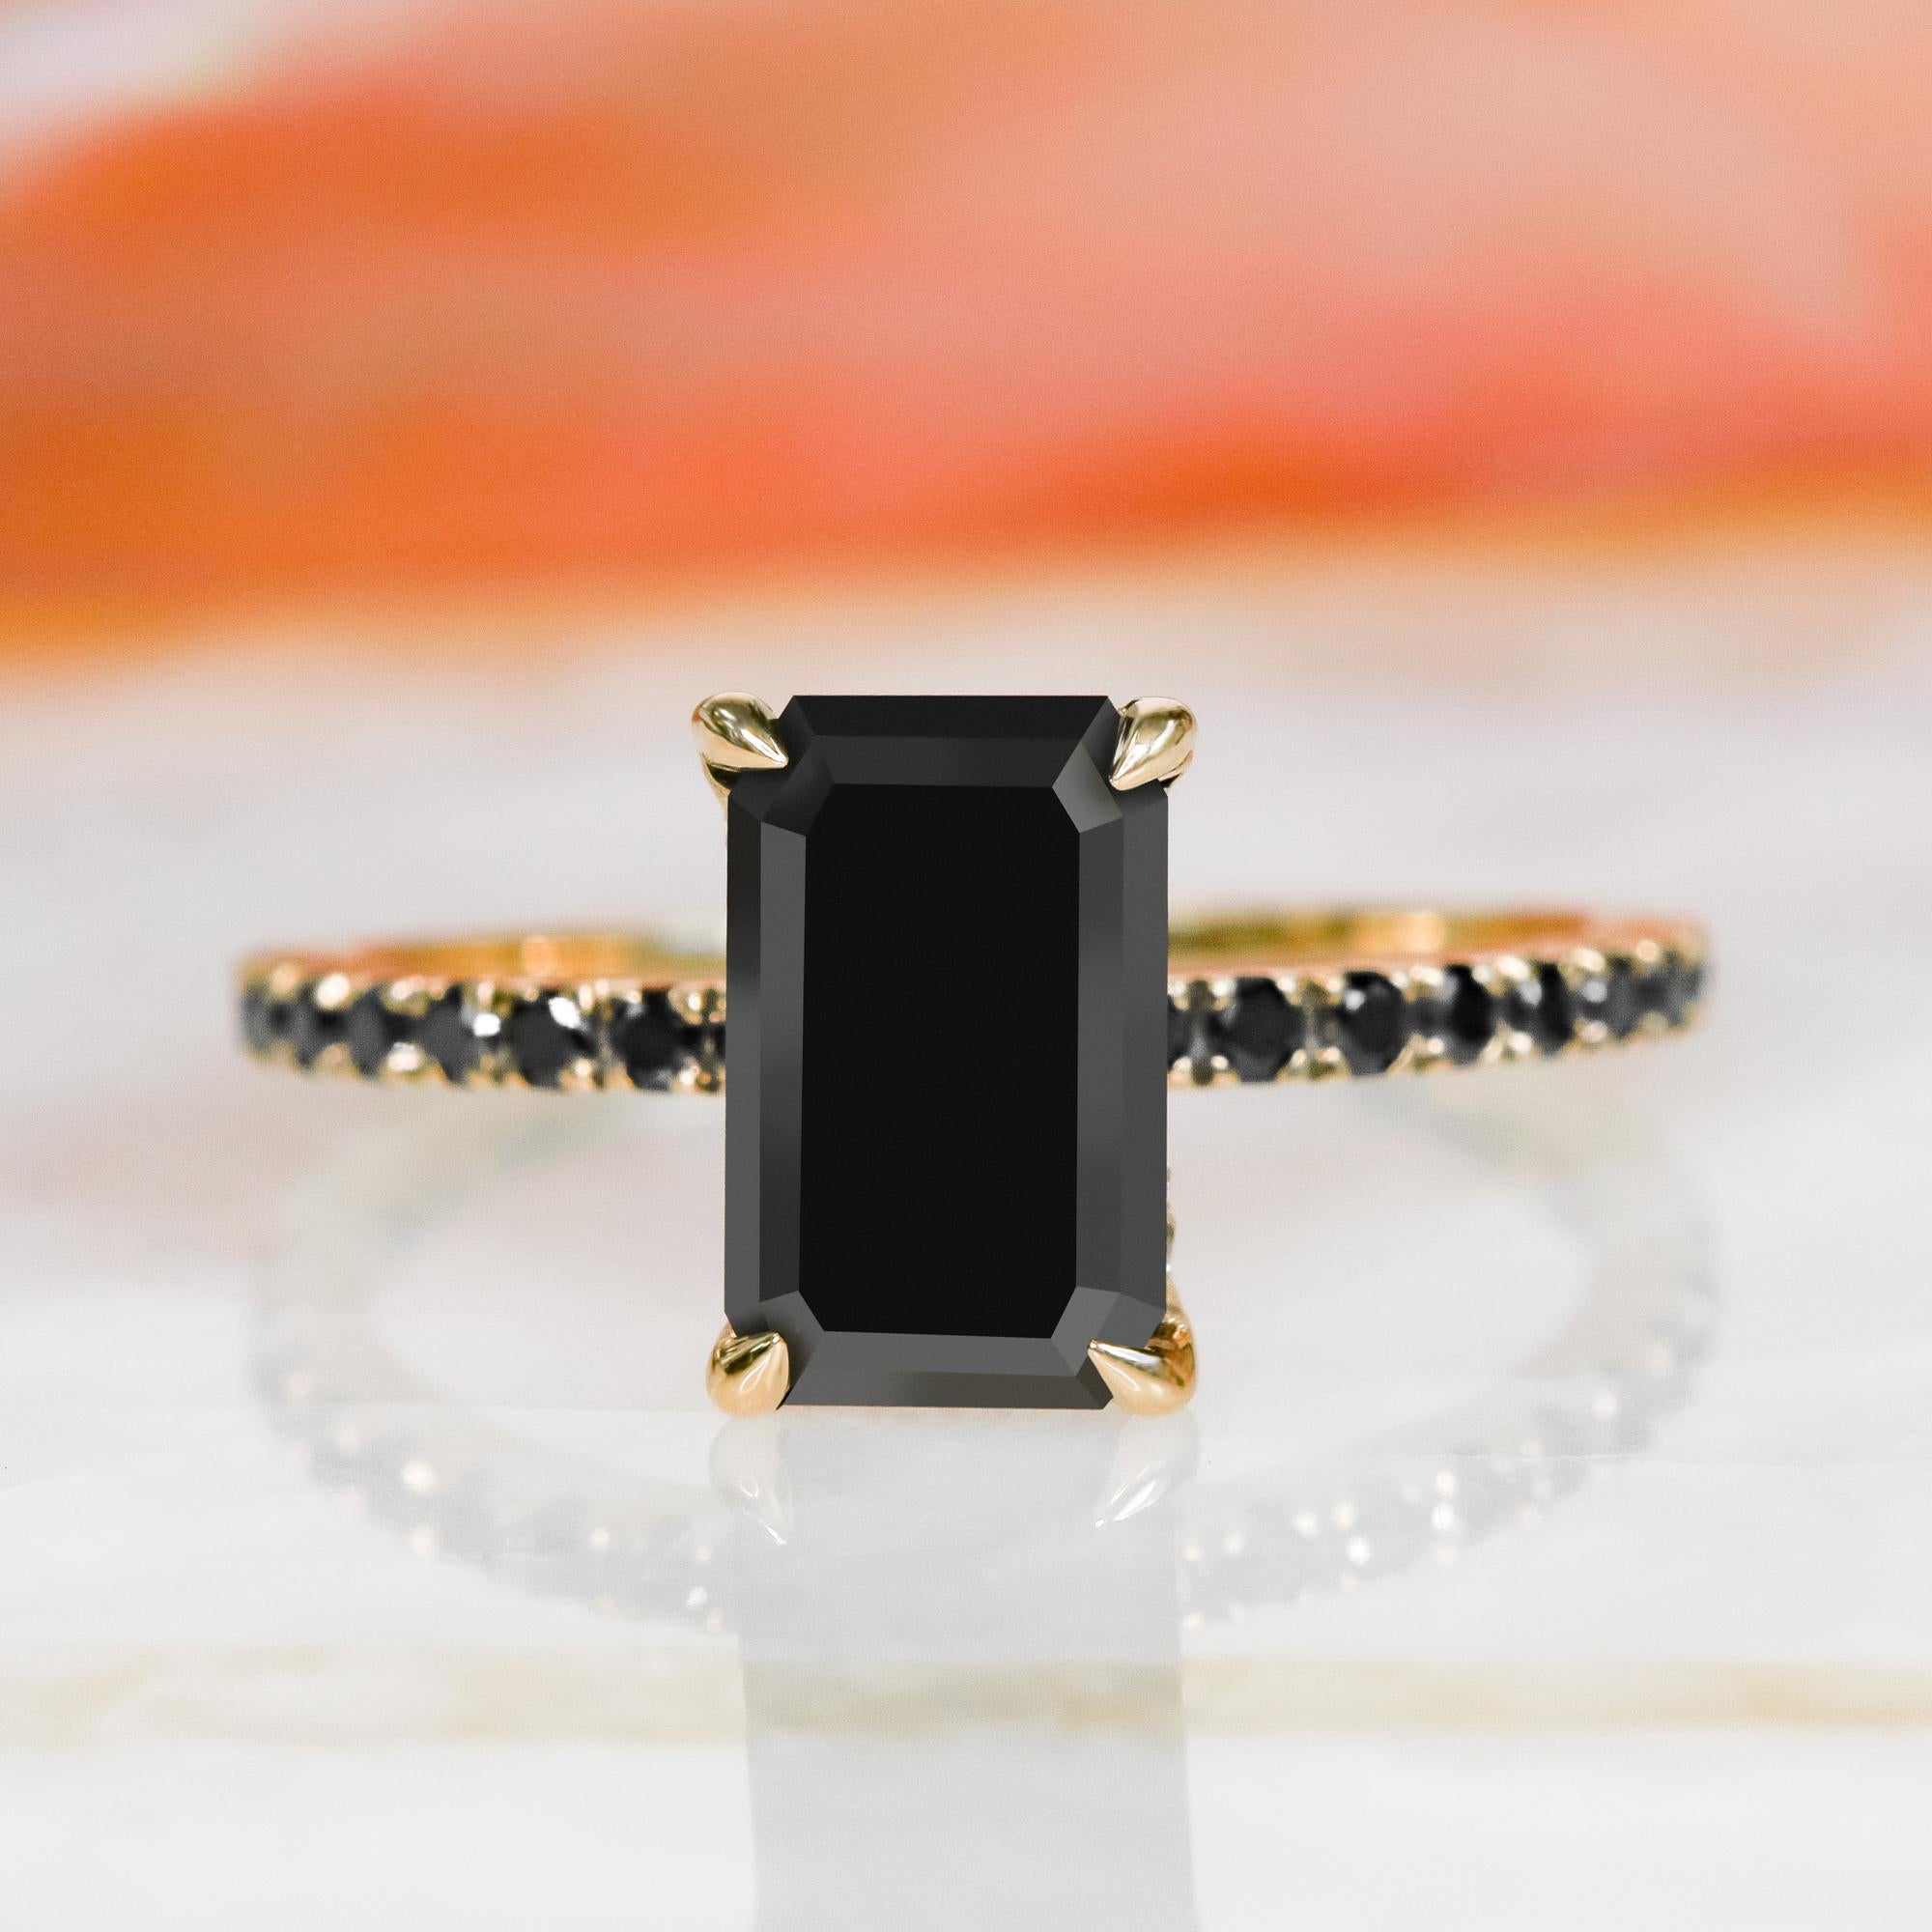 Our first ring of the Black Ice collection features a natural black emerald diamond in a unique engagement ring with a delicate hidden halo featuring white accent natural diamonds. 

We LOVE this ring!! it's The perfect engagement ring for beautiful